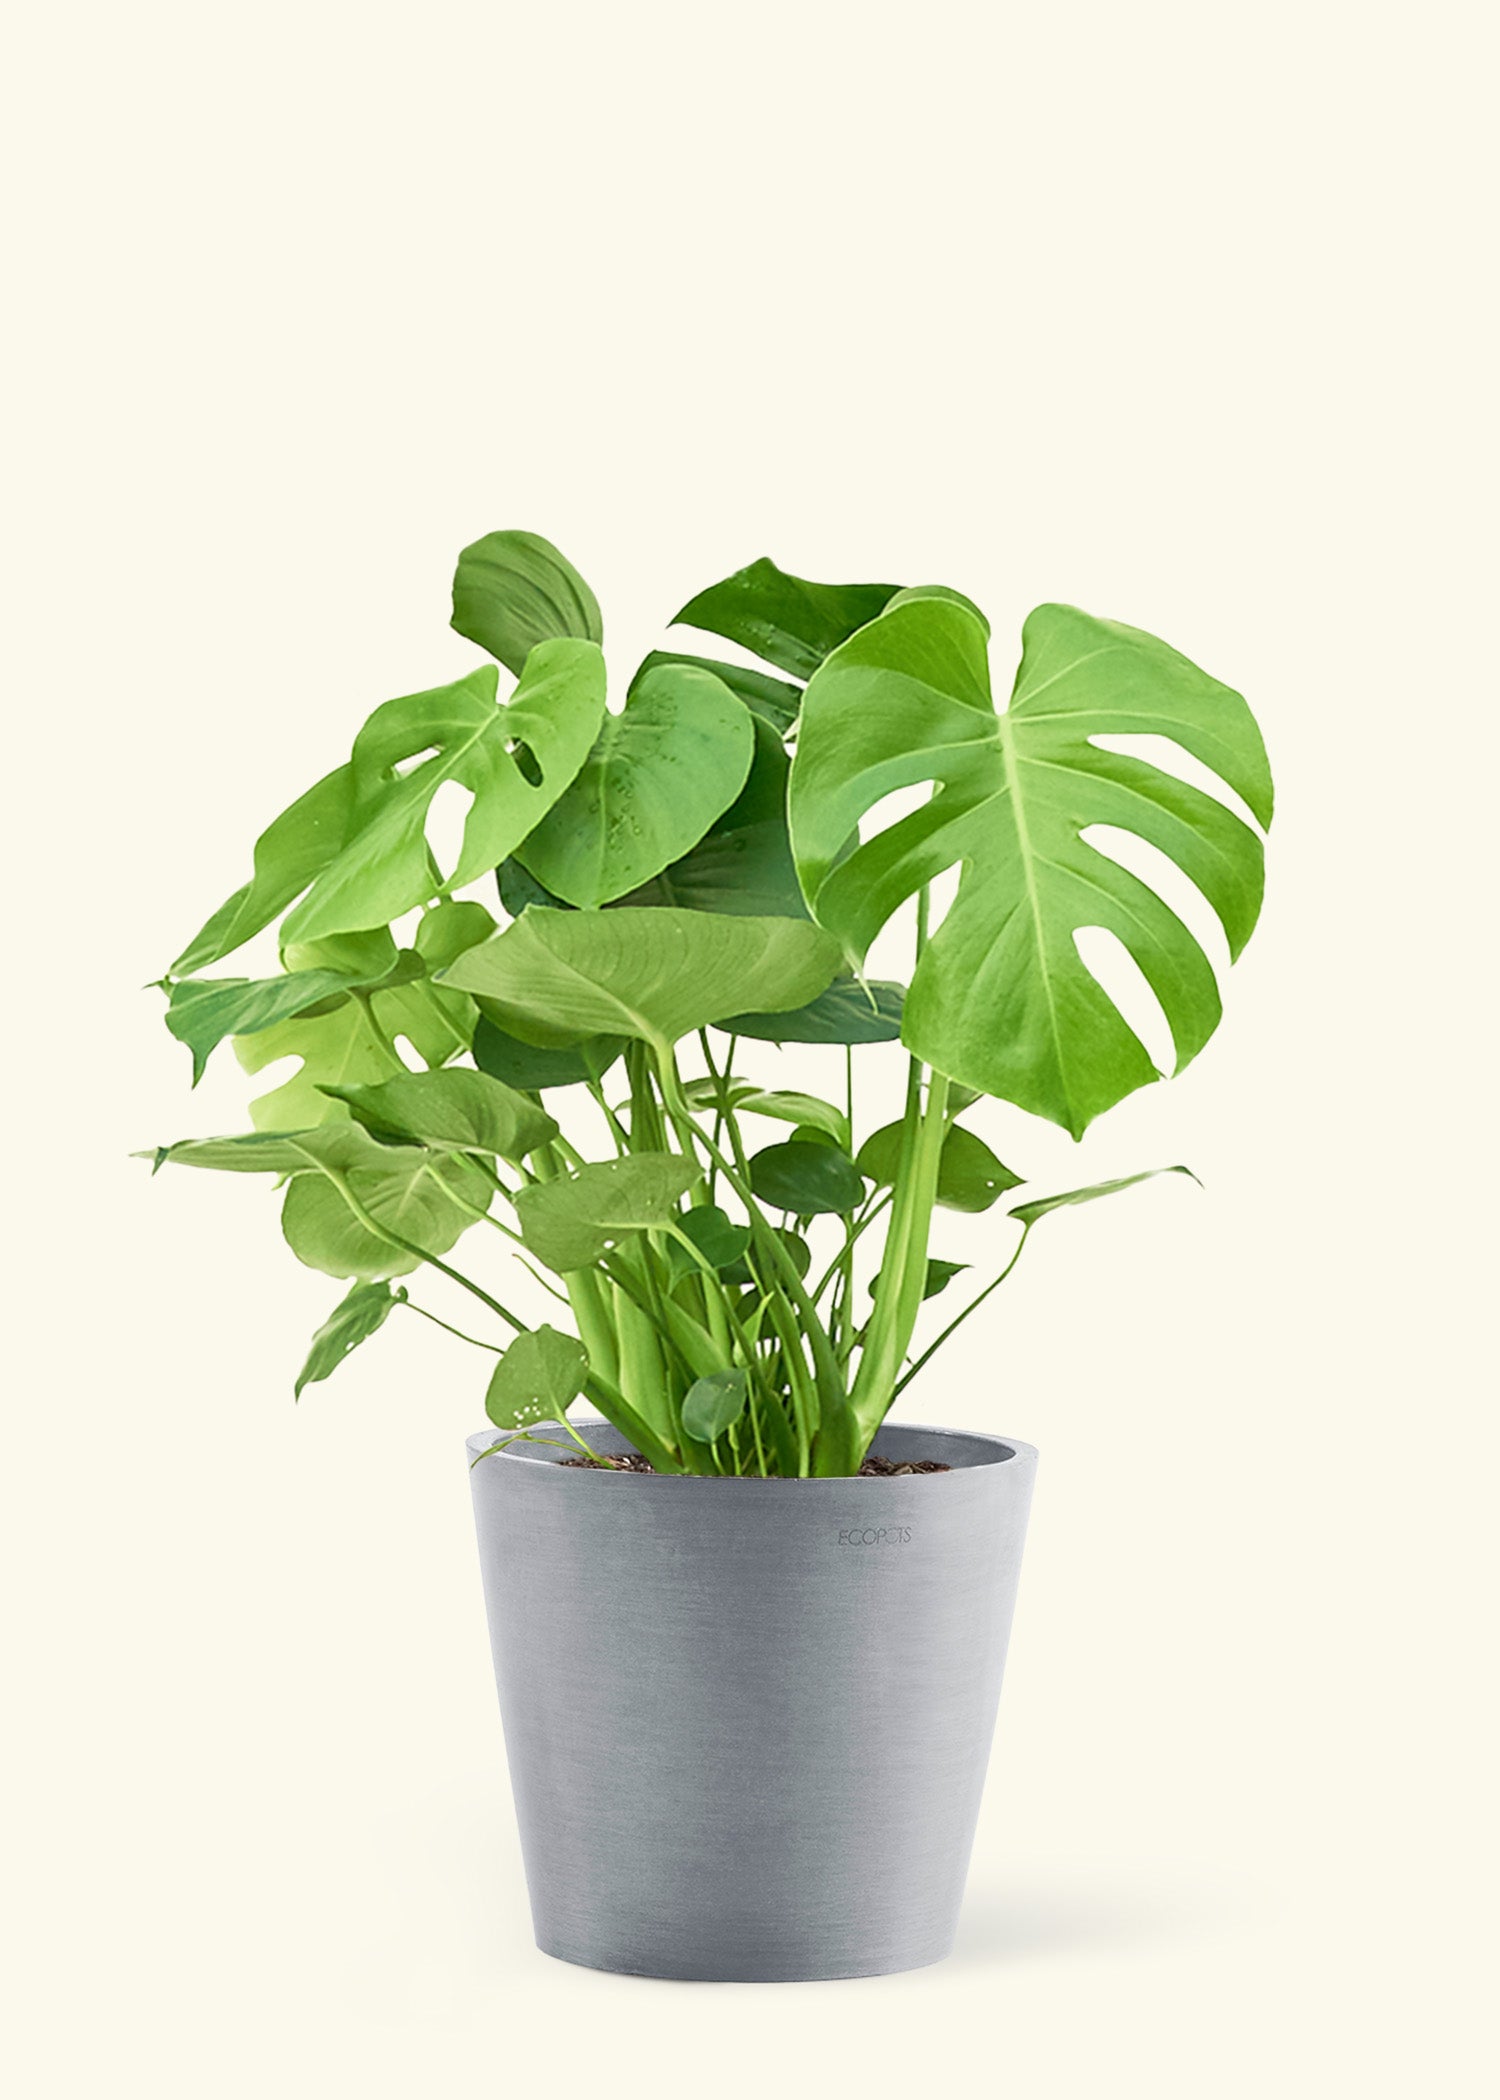 Large Monstera Swiss Cheese Plant Plant in a gray stone pot.